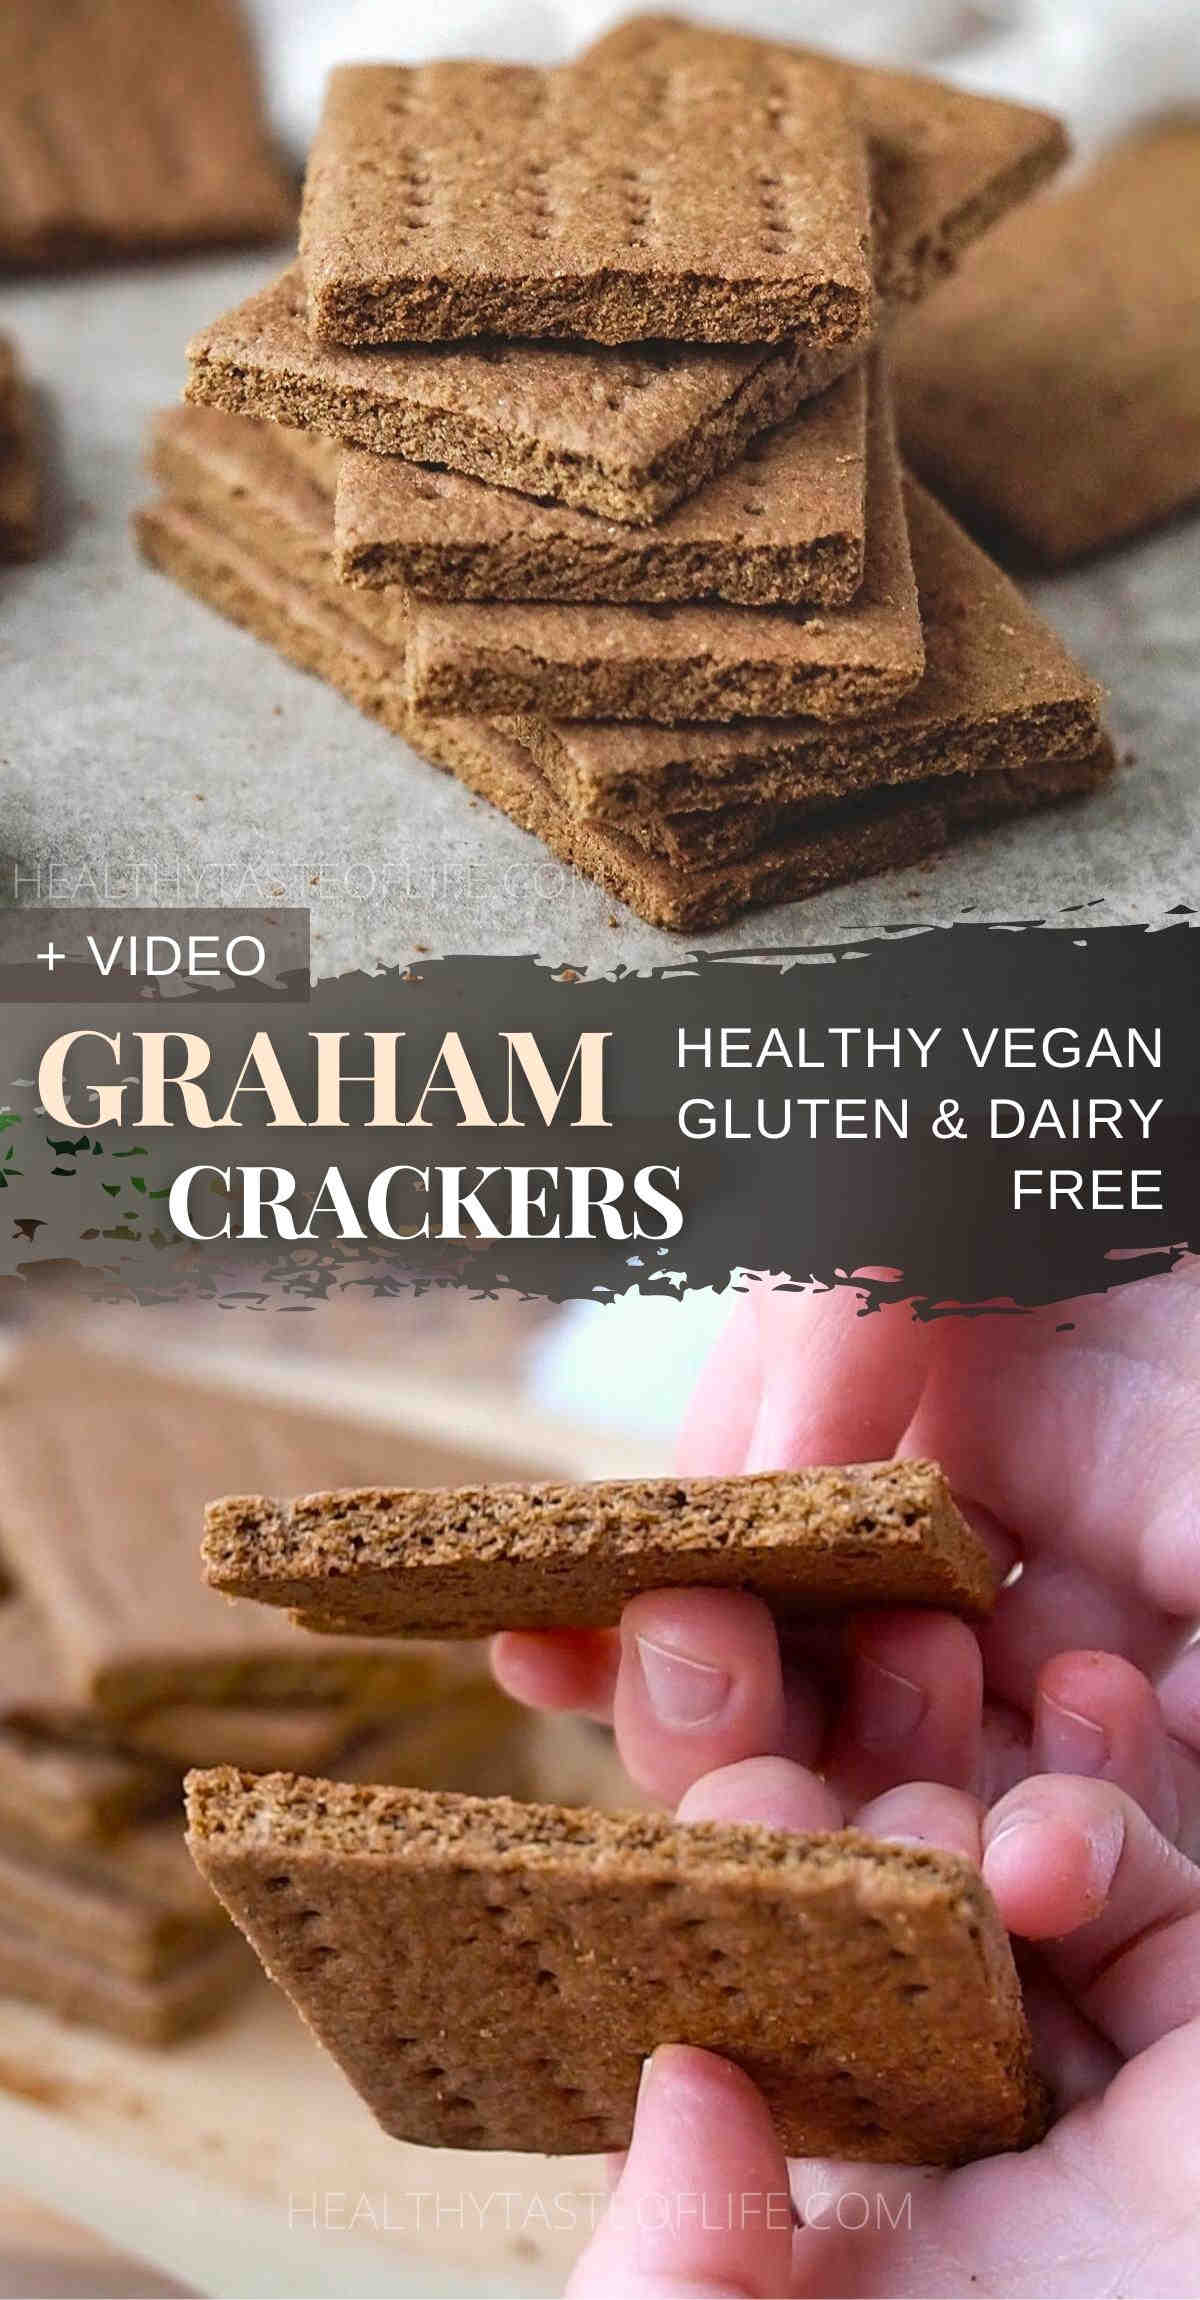 Gluten free dairy free graham crackers with teff flour, crisp graham cracker alternative with maple & cinnamon flavor. A recipe with teff flour that yields perfect gluten free graham crackers. These teff crackers taste similar to vegan graham crackers and are also soy free, egg free, dairy free, refined sugar free. There's no honey and still, you'll get tasty kid friendly gluten free graham crackers! #vegangrahamcrackers #dairyfreegrahamcrackers #teffcrackers #glutenfreegrahamcrackers